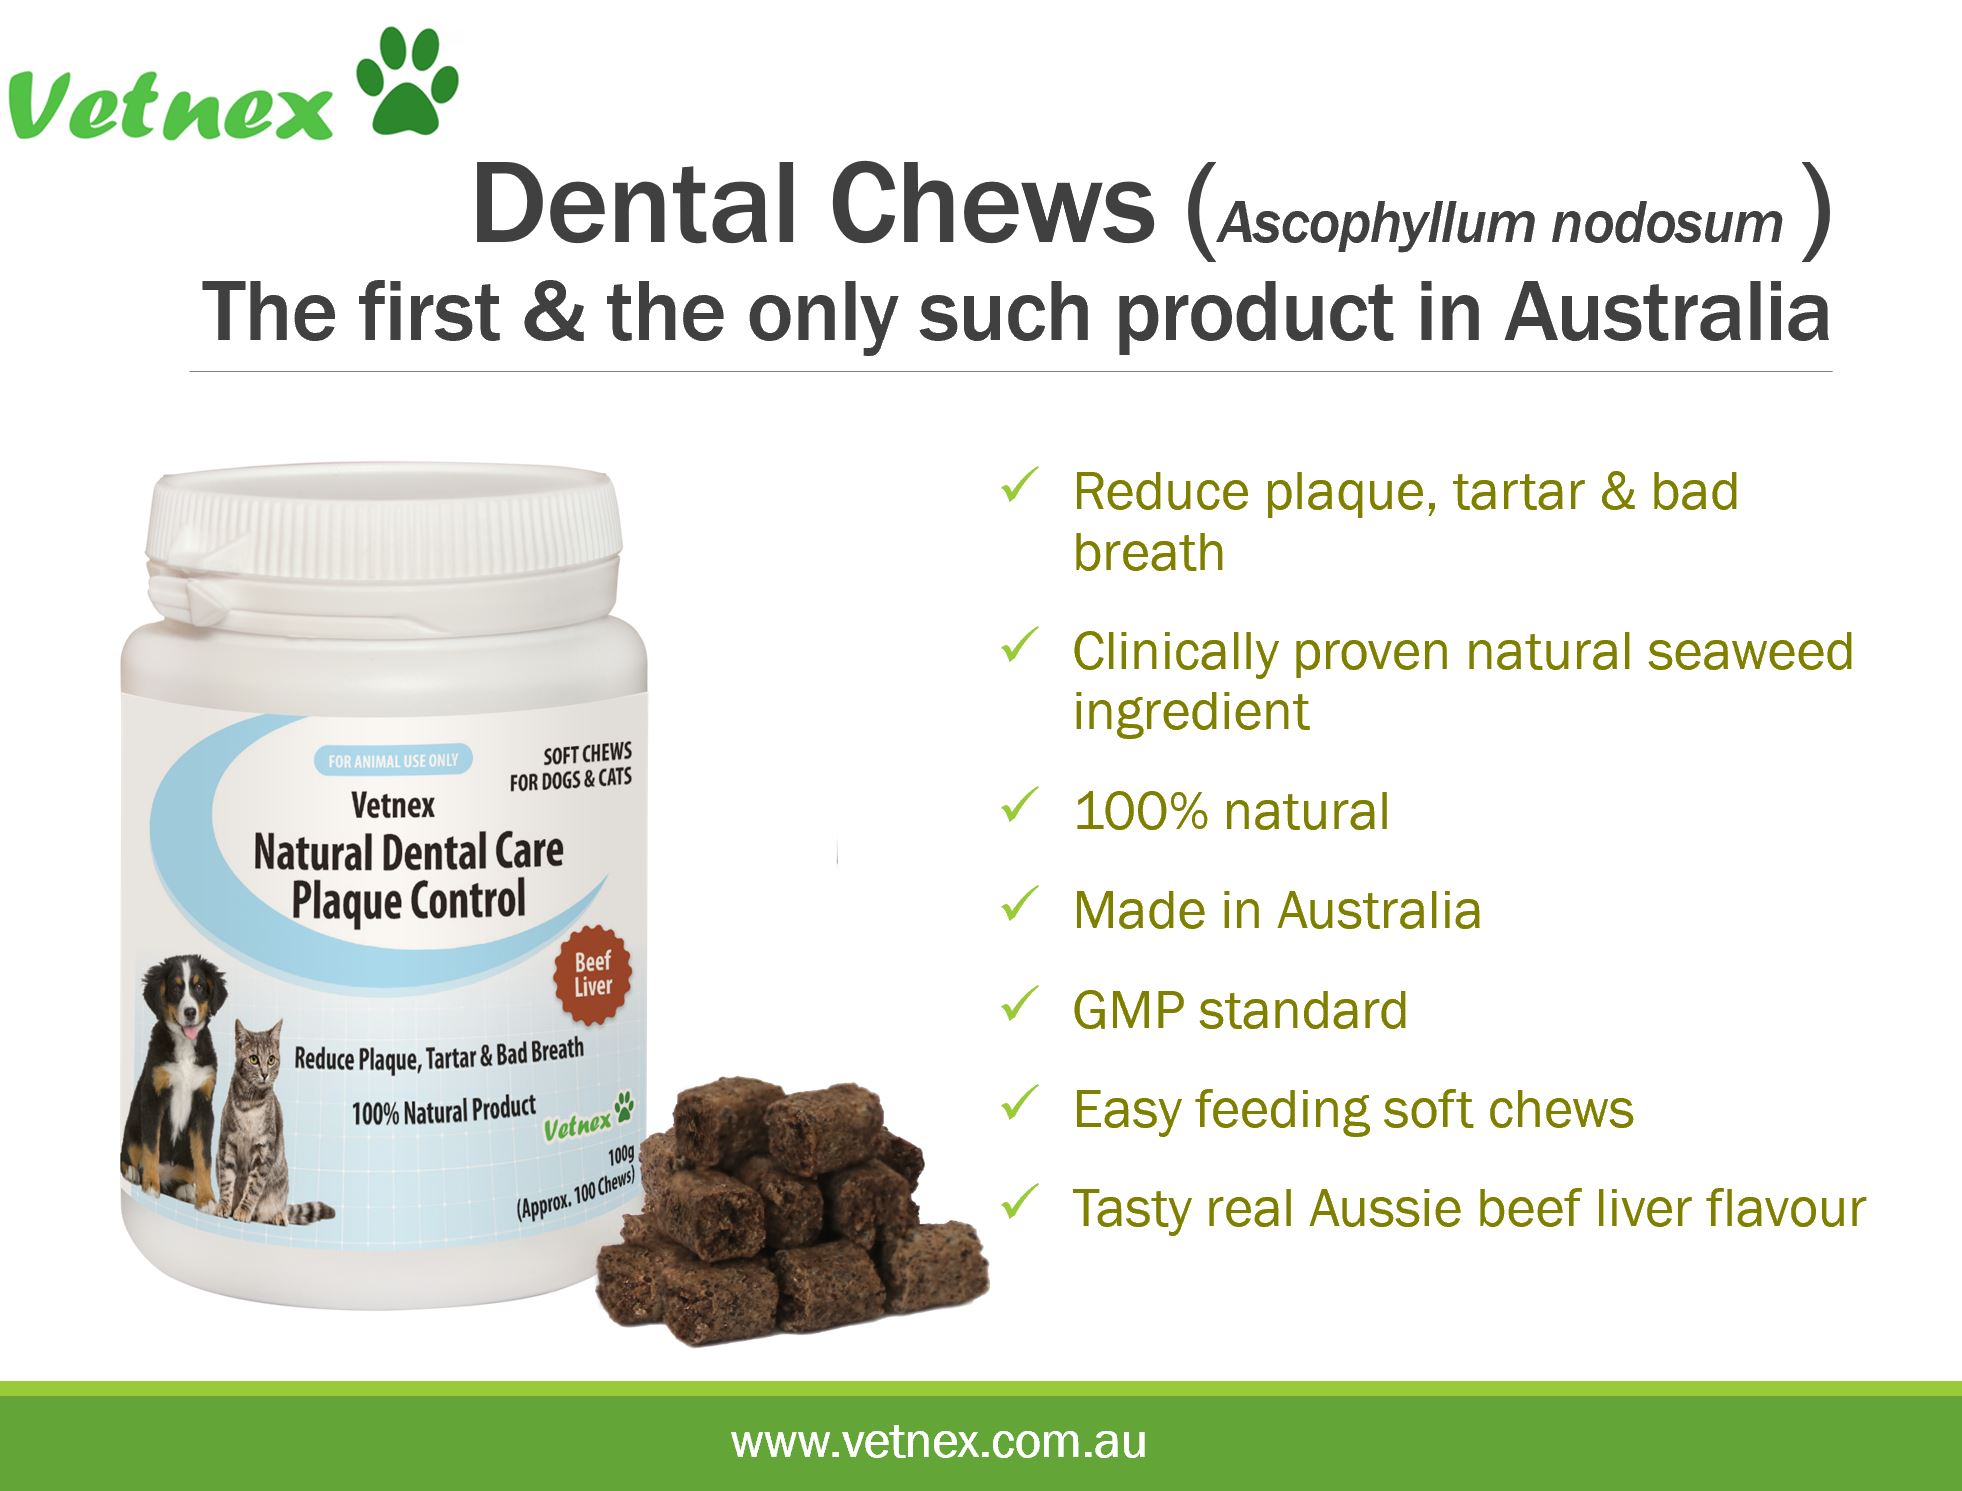 Vetnex Natural Dental Care Plaque Control Soft Chews, The First & The Only Such Product Available in Australia 